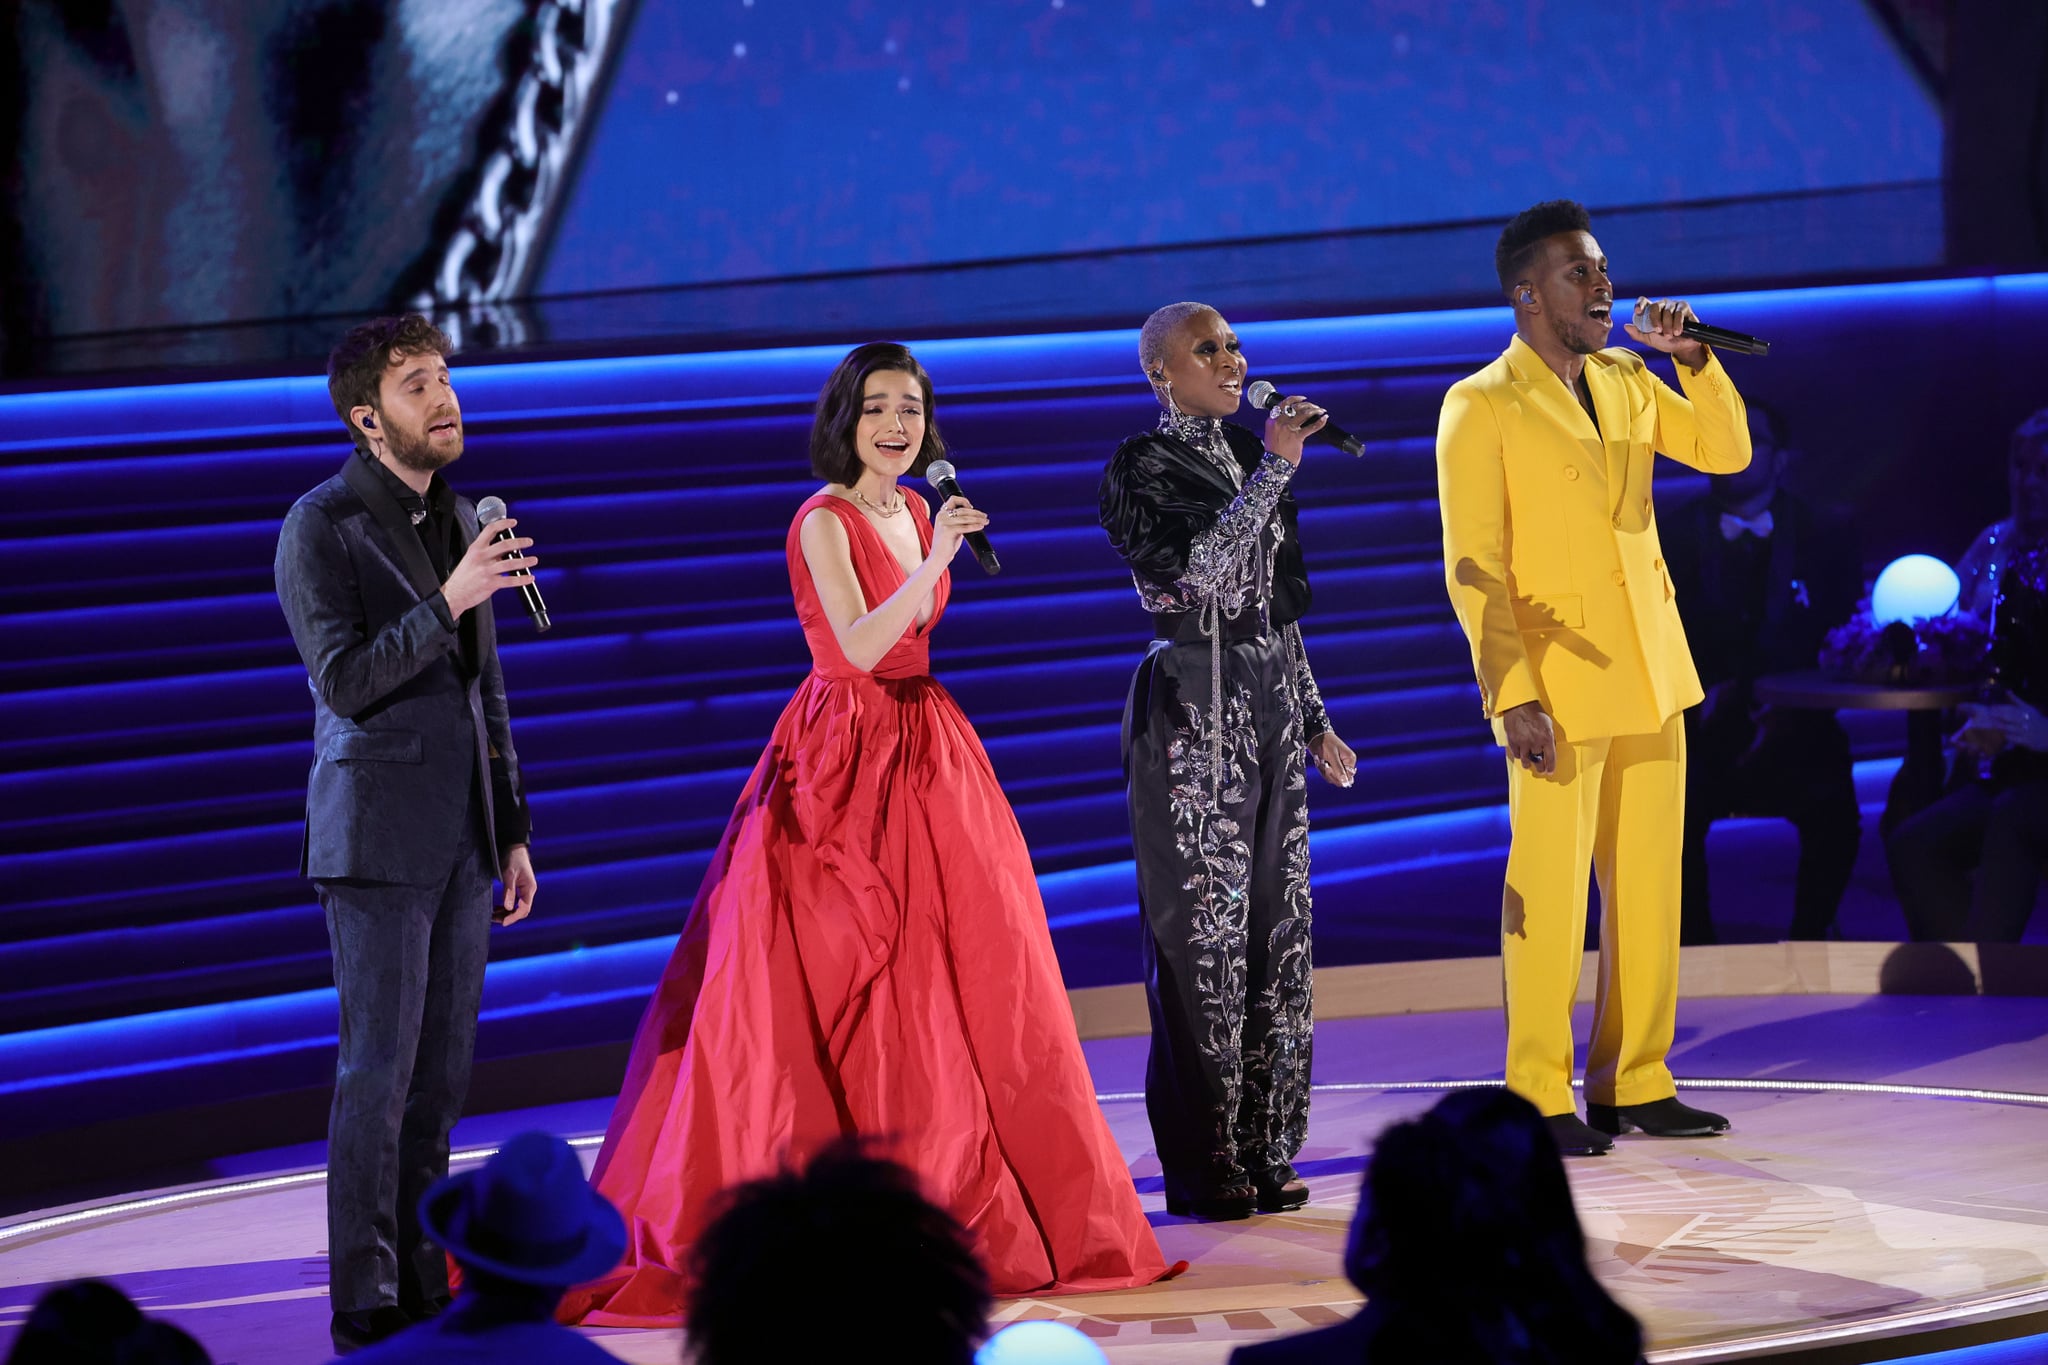 LAS VEGAS, NEVADA - APRIL 03: (L-R) Ben Platt, Rachel Zegler, Cynthia Erivo, and Leslie Odom Jr. perform onstage during the In Memoriam tribute at the 64th Annual GRAMMY Awards at MGM Grand Garden Arena on April 03, 2022 in Las Vegas, Nevada. (Photo by Matt Winkelmeyer/Getty Images)